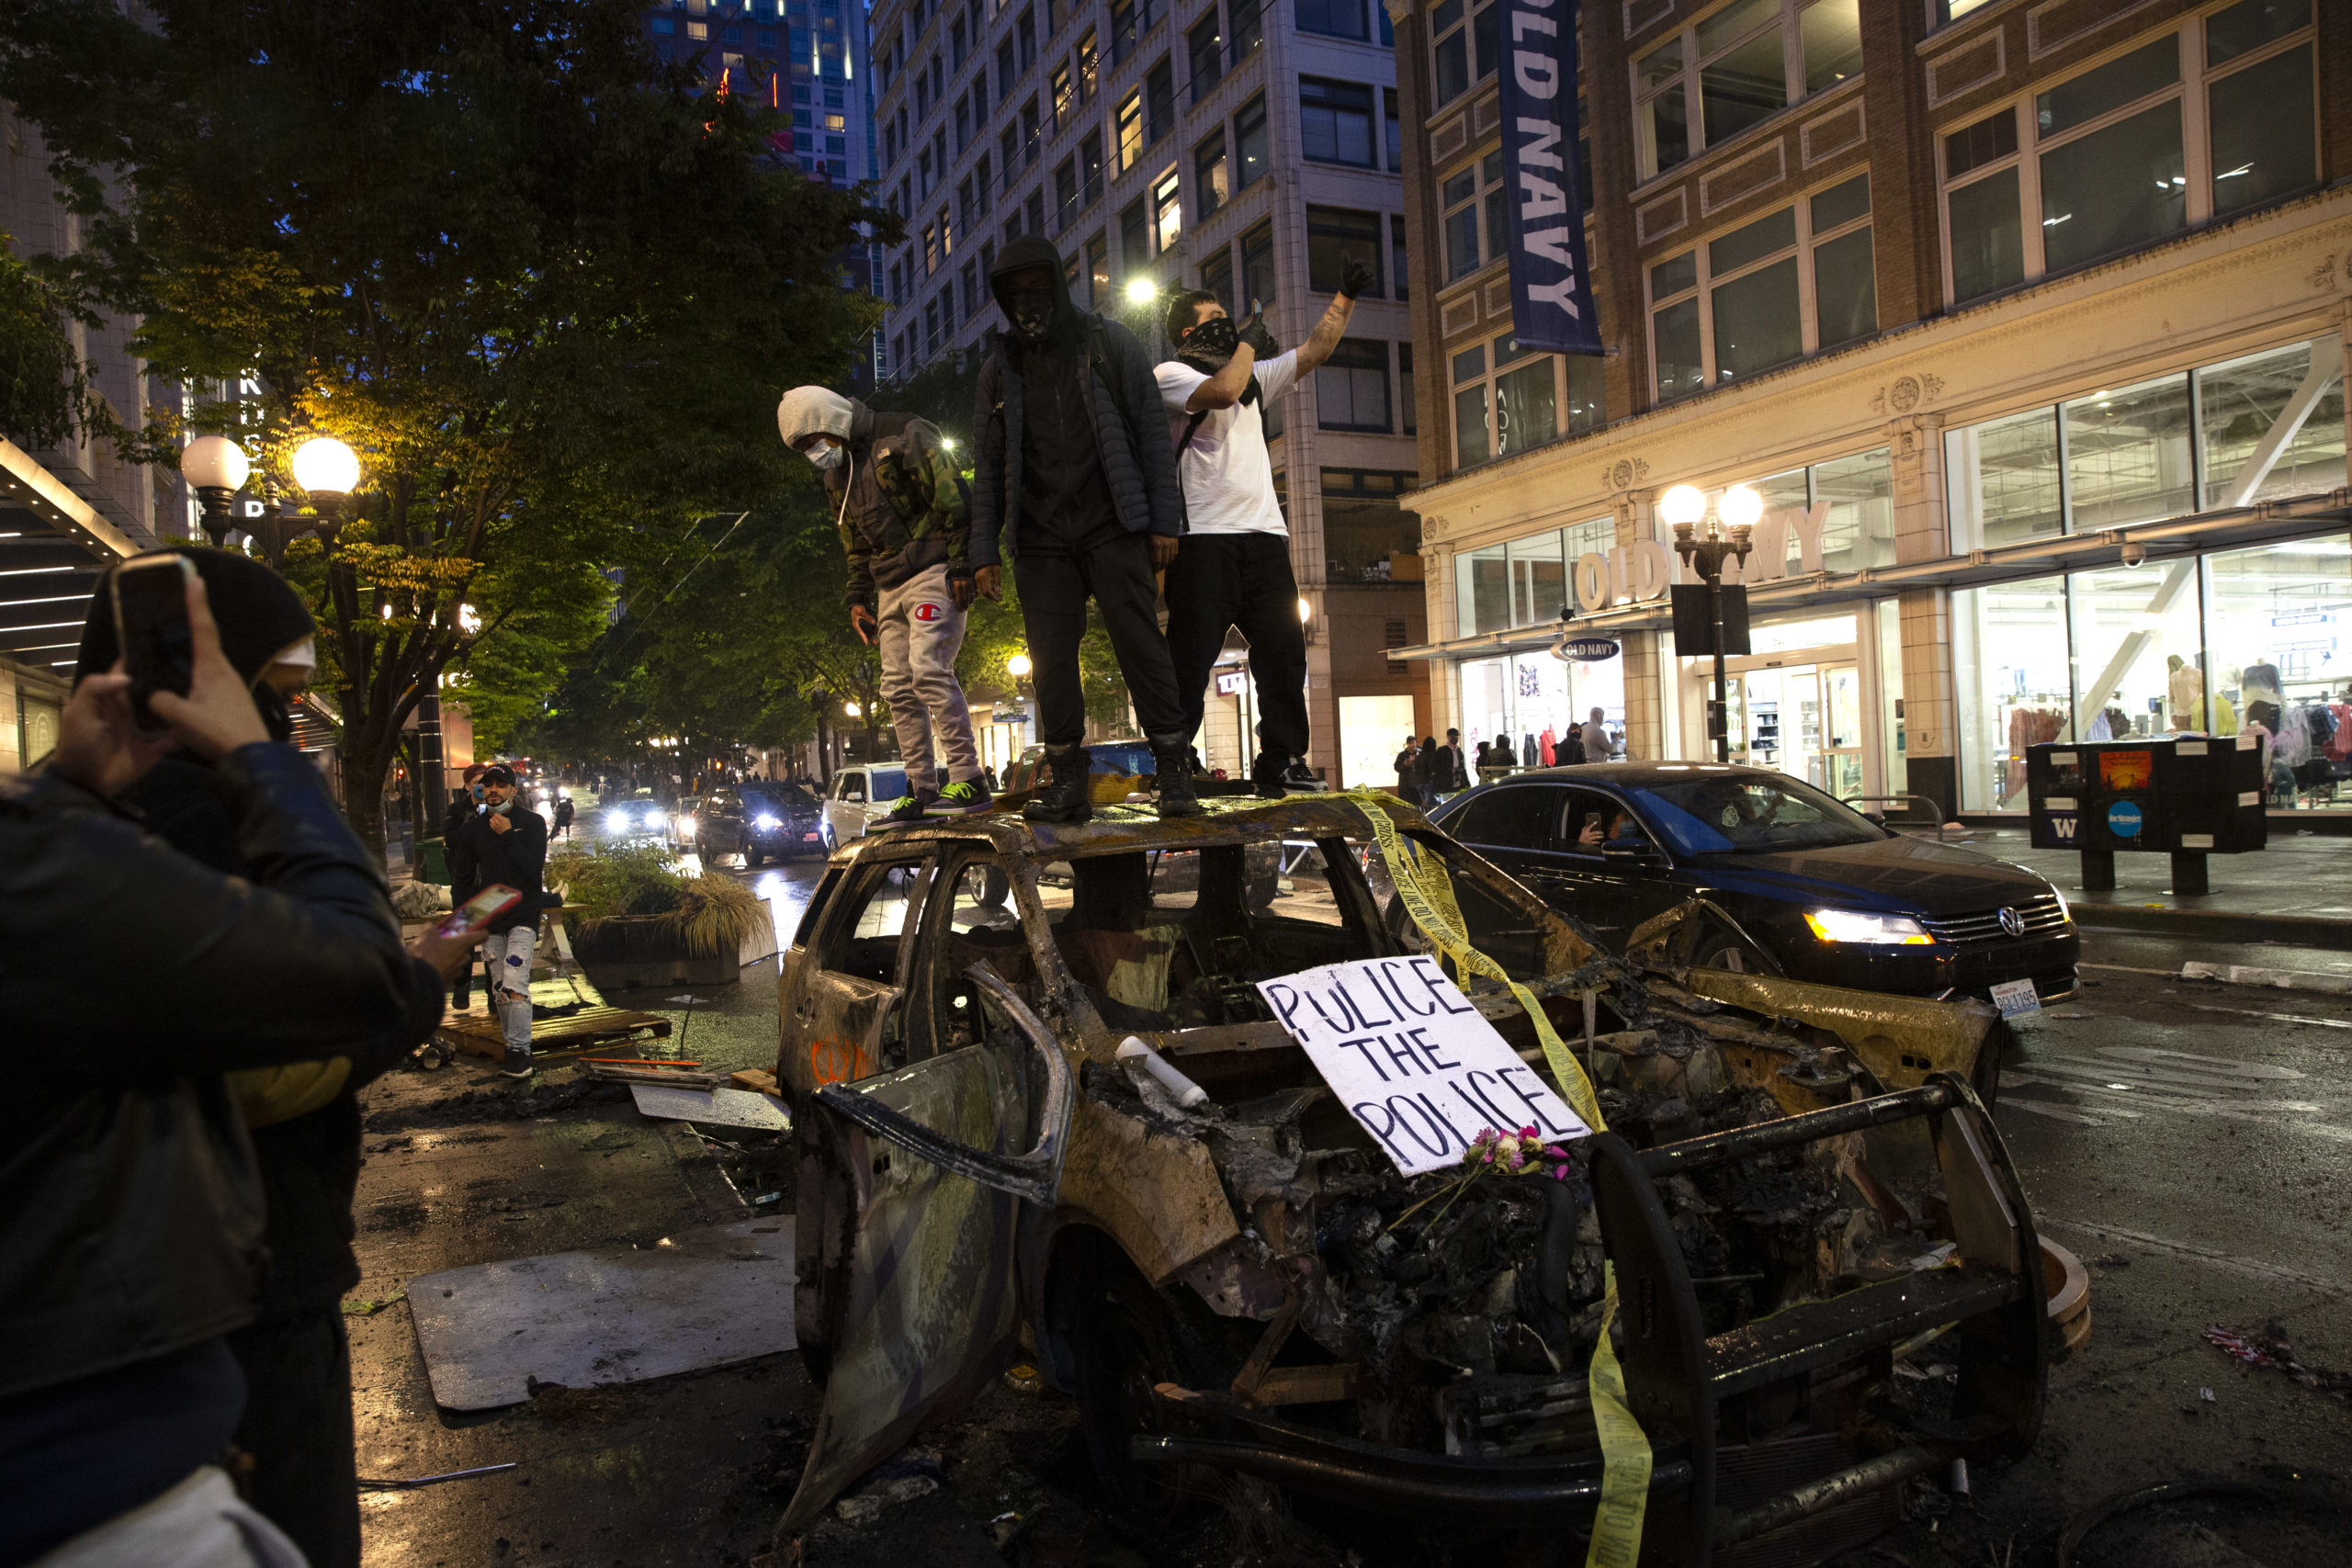 SEATTLE, WA - MAY 30: Protesters riot in the streets following a peaceful rally expressing outrage over the death of George Floyd on May 30, 2020 in Seattle, Washington. Protests have erupted nationwide after Floyd died while in the custody of police in Minneapolis. (Karen Ducey/Getty Images)